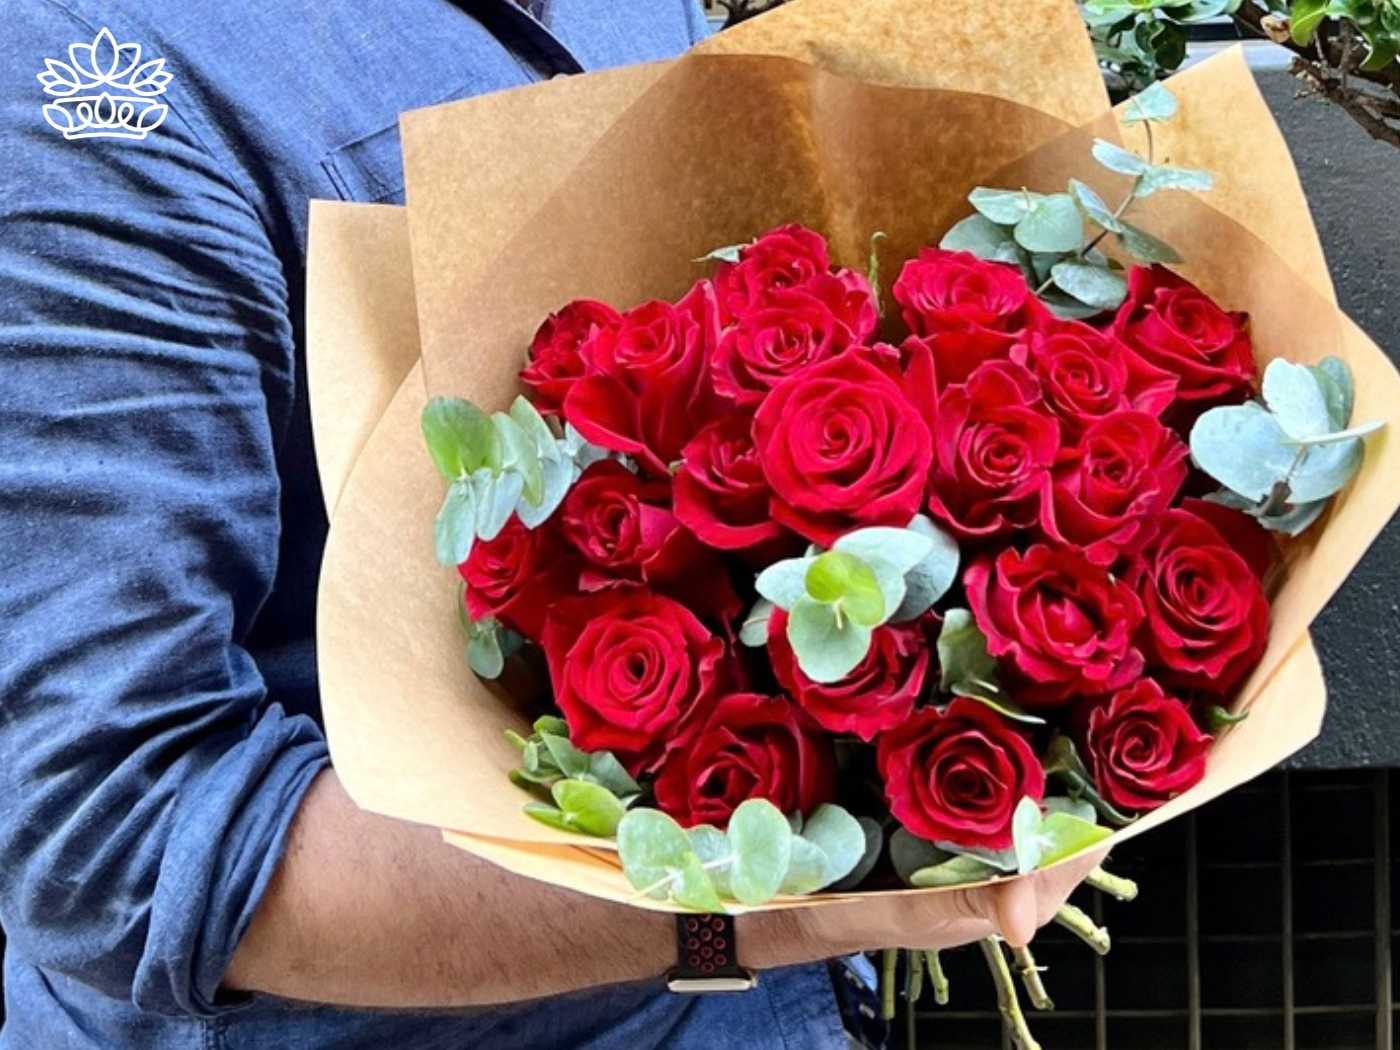 Stunning bouquet of red roses from the Flowers By Type Collection, with eucalyptus leaves, representing the genus Rosa at Fabulous Flowers and Gifts. Cut flowers appear ready to germinate and act as the perfect gift.